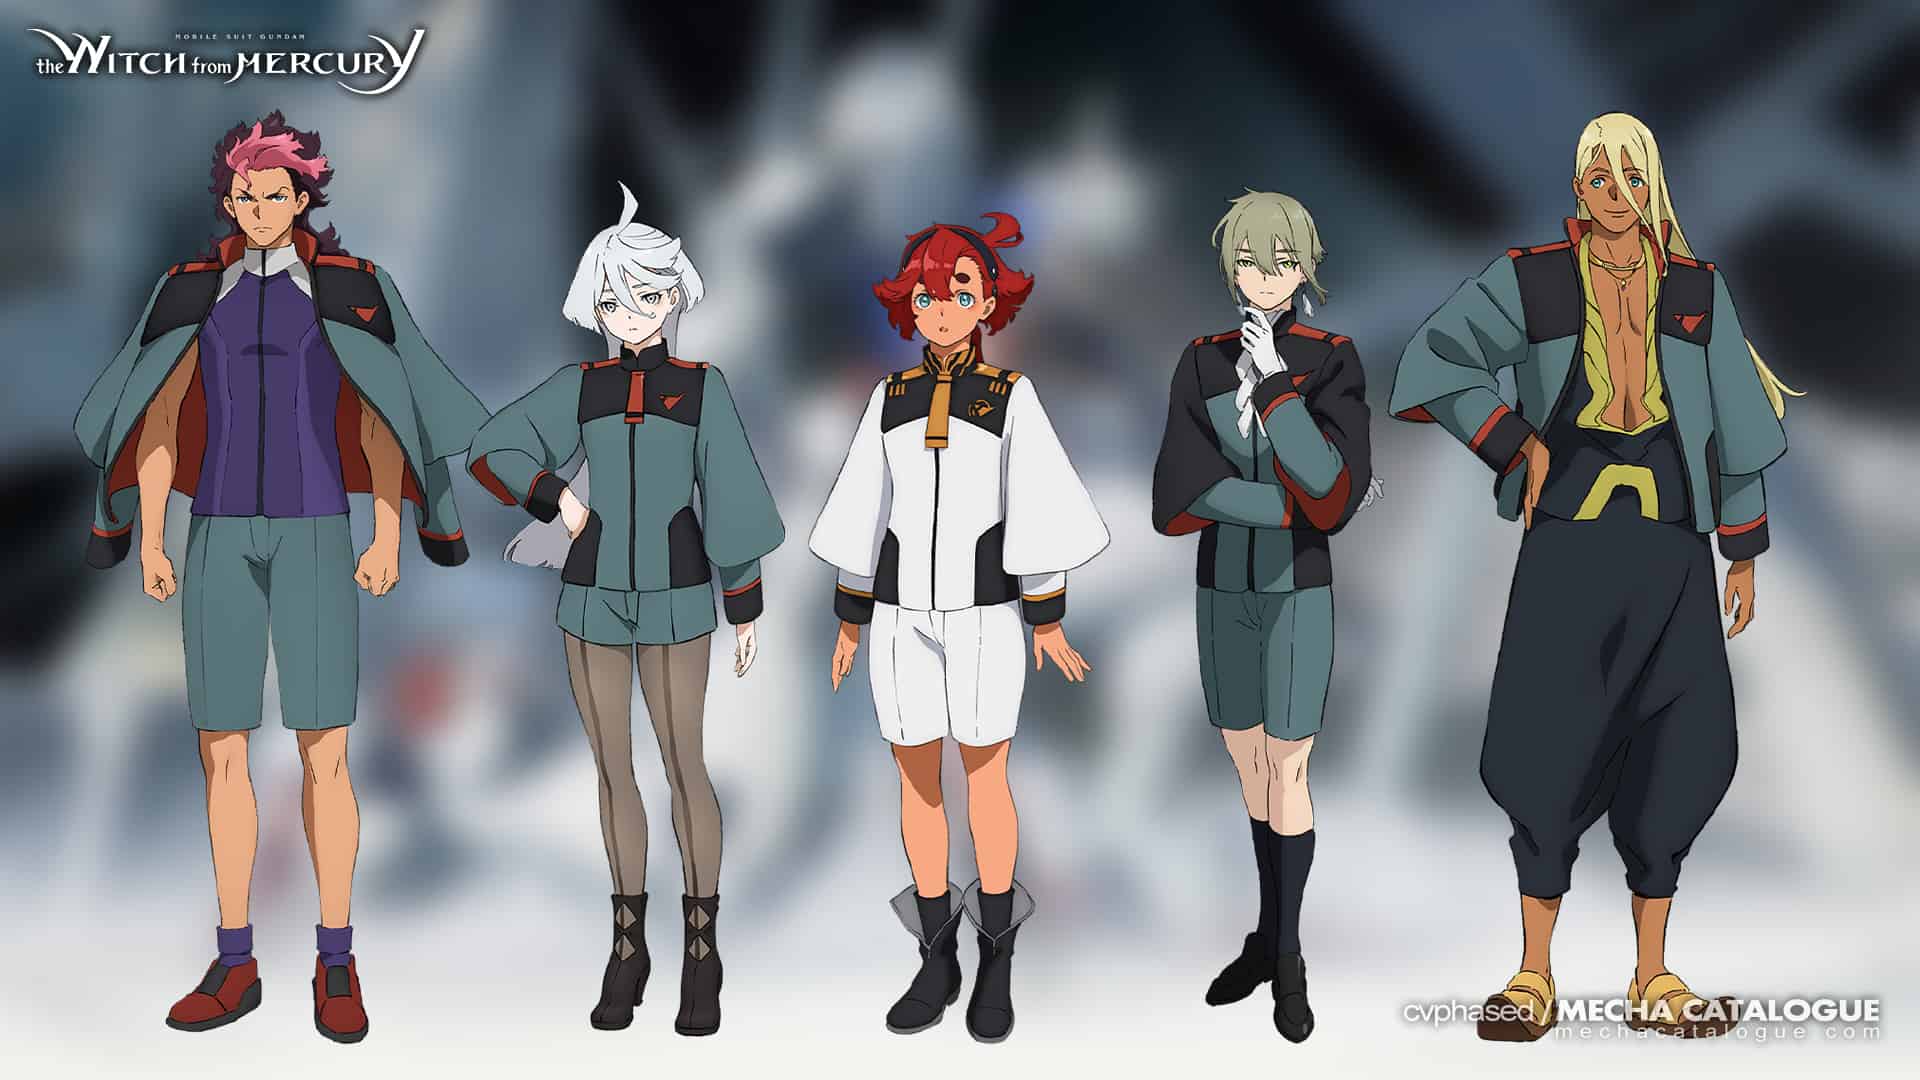 Mobile suit Gundam: The witch from Mercury characters